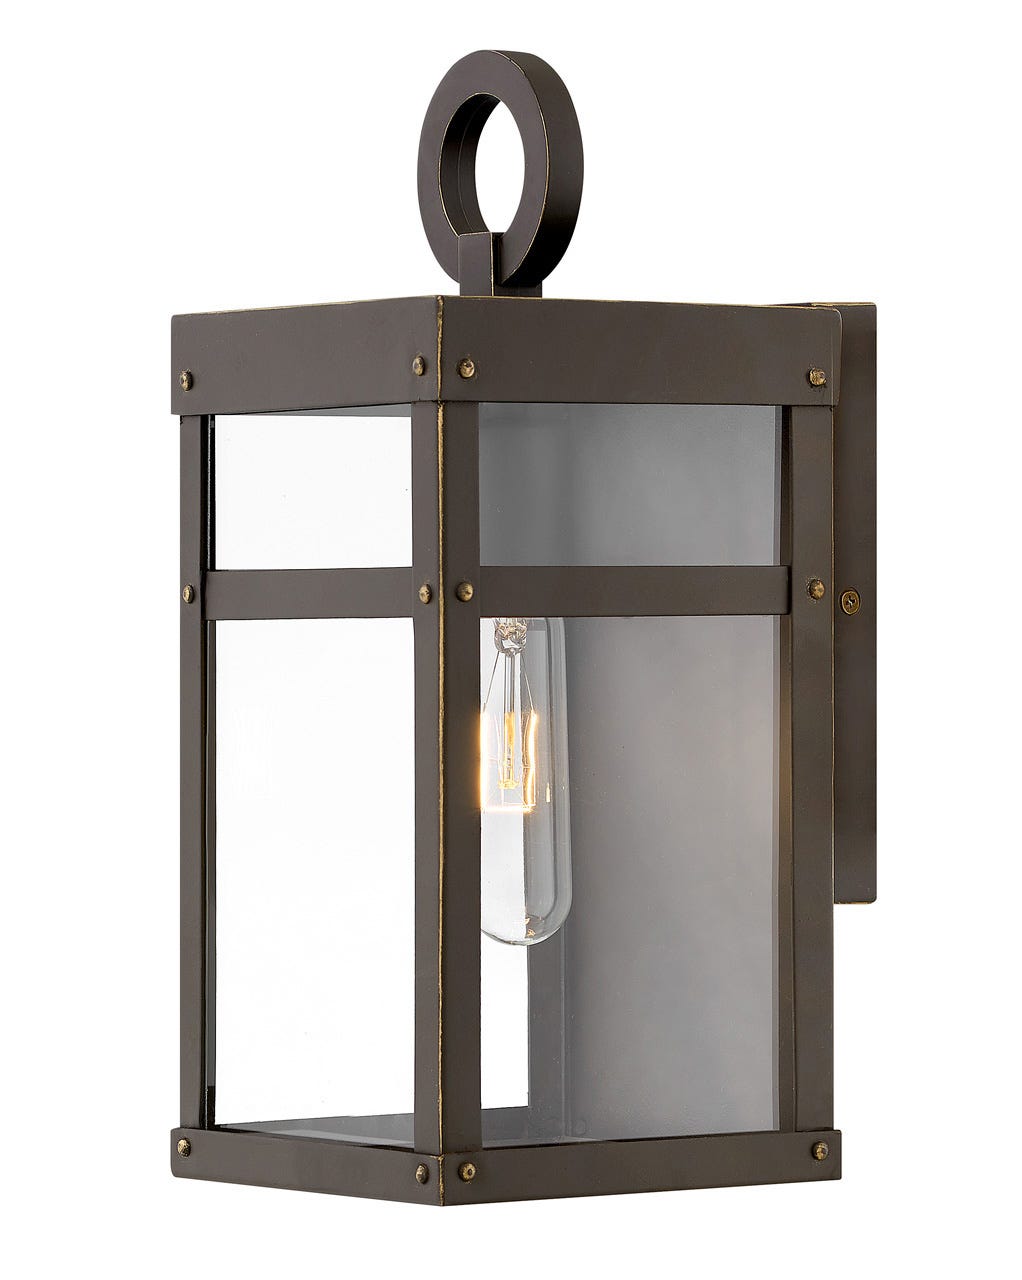 OUTDOOR PORTER Wall Mount Lantern Outdoor l Wall Hinkley Oil Rubbed Bronze 6.5x5.5x13.0 